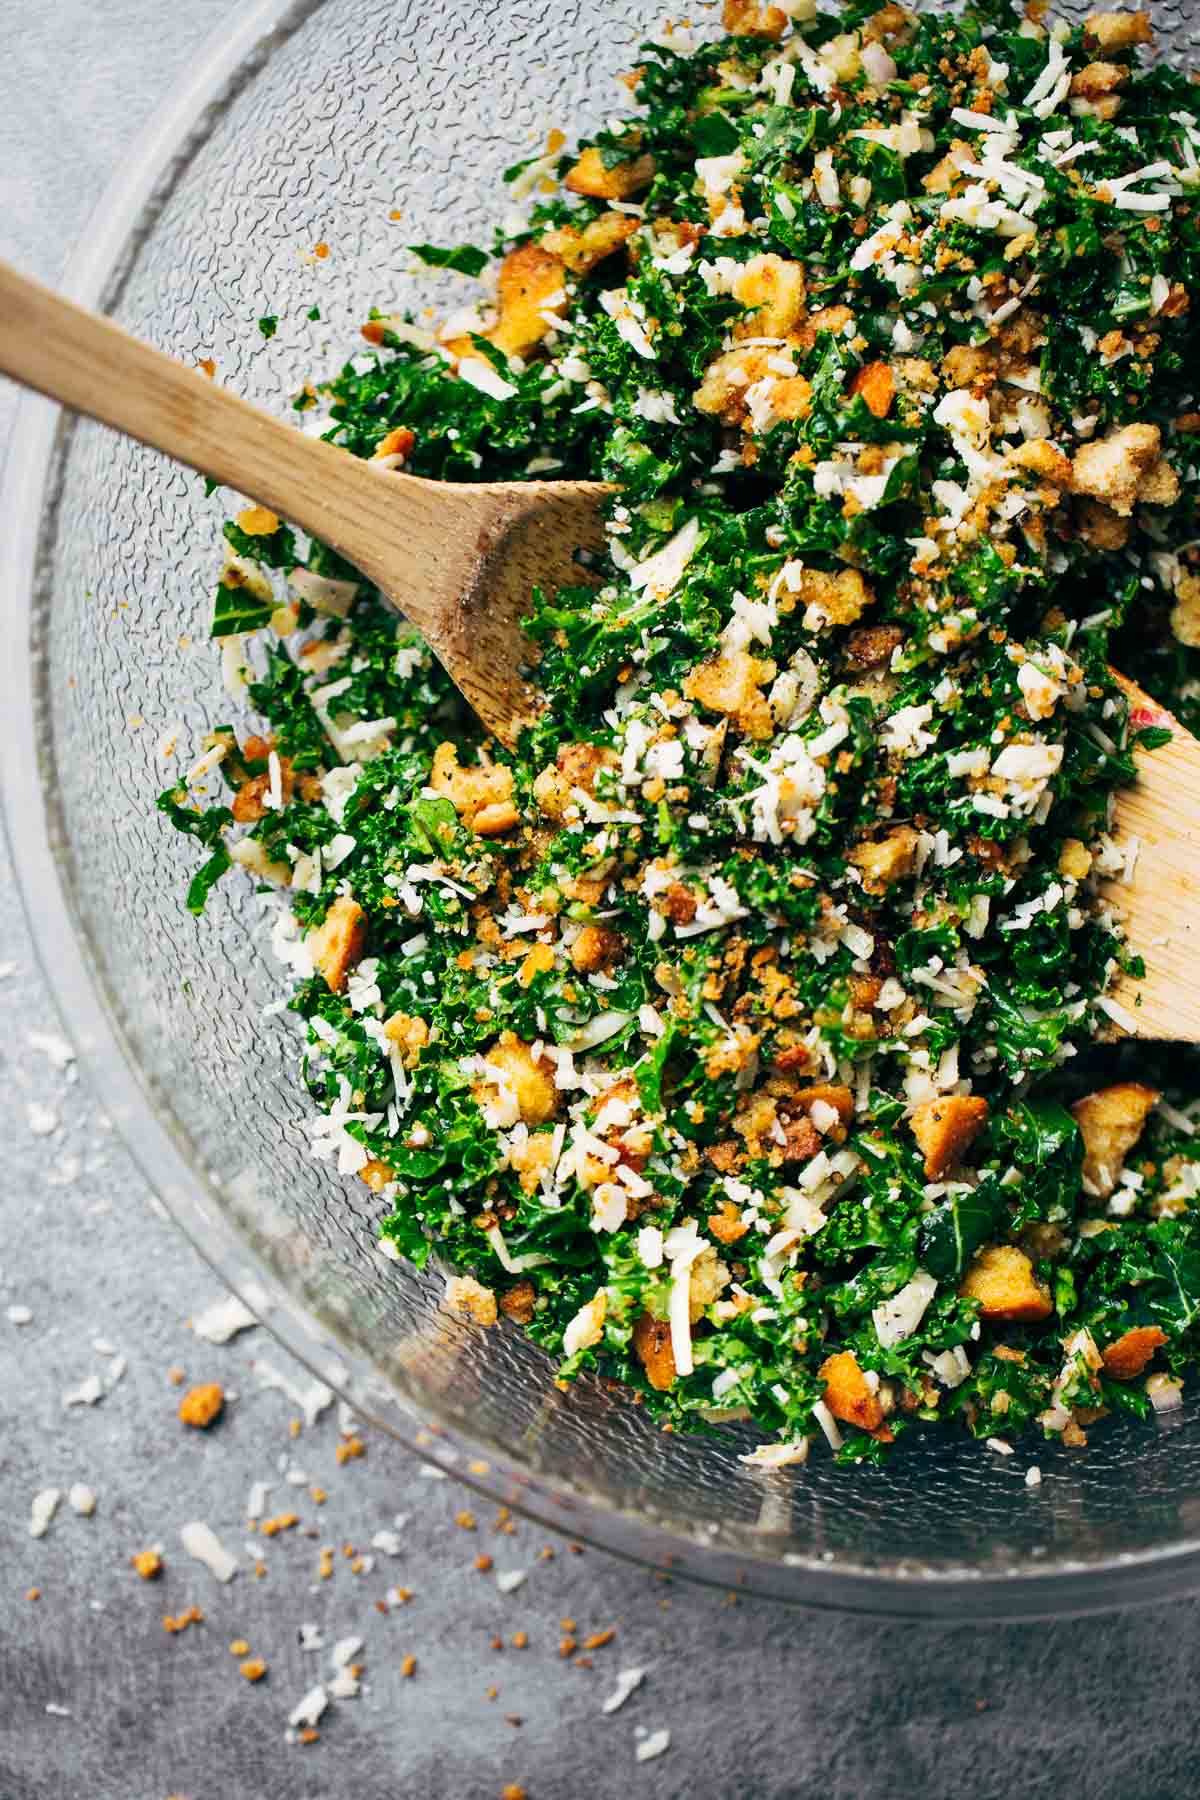 Kale salad in a clear mixing bowl.